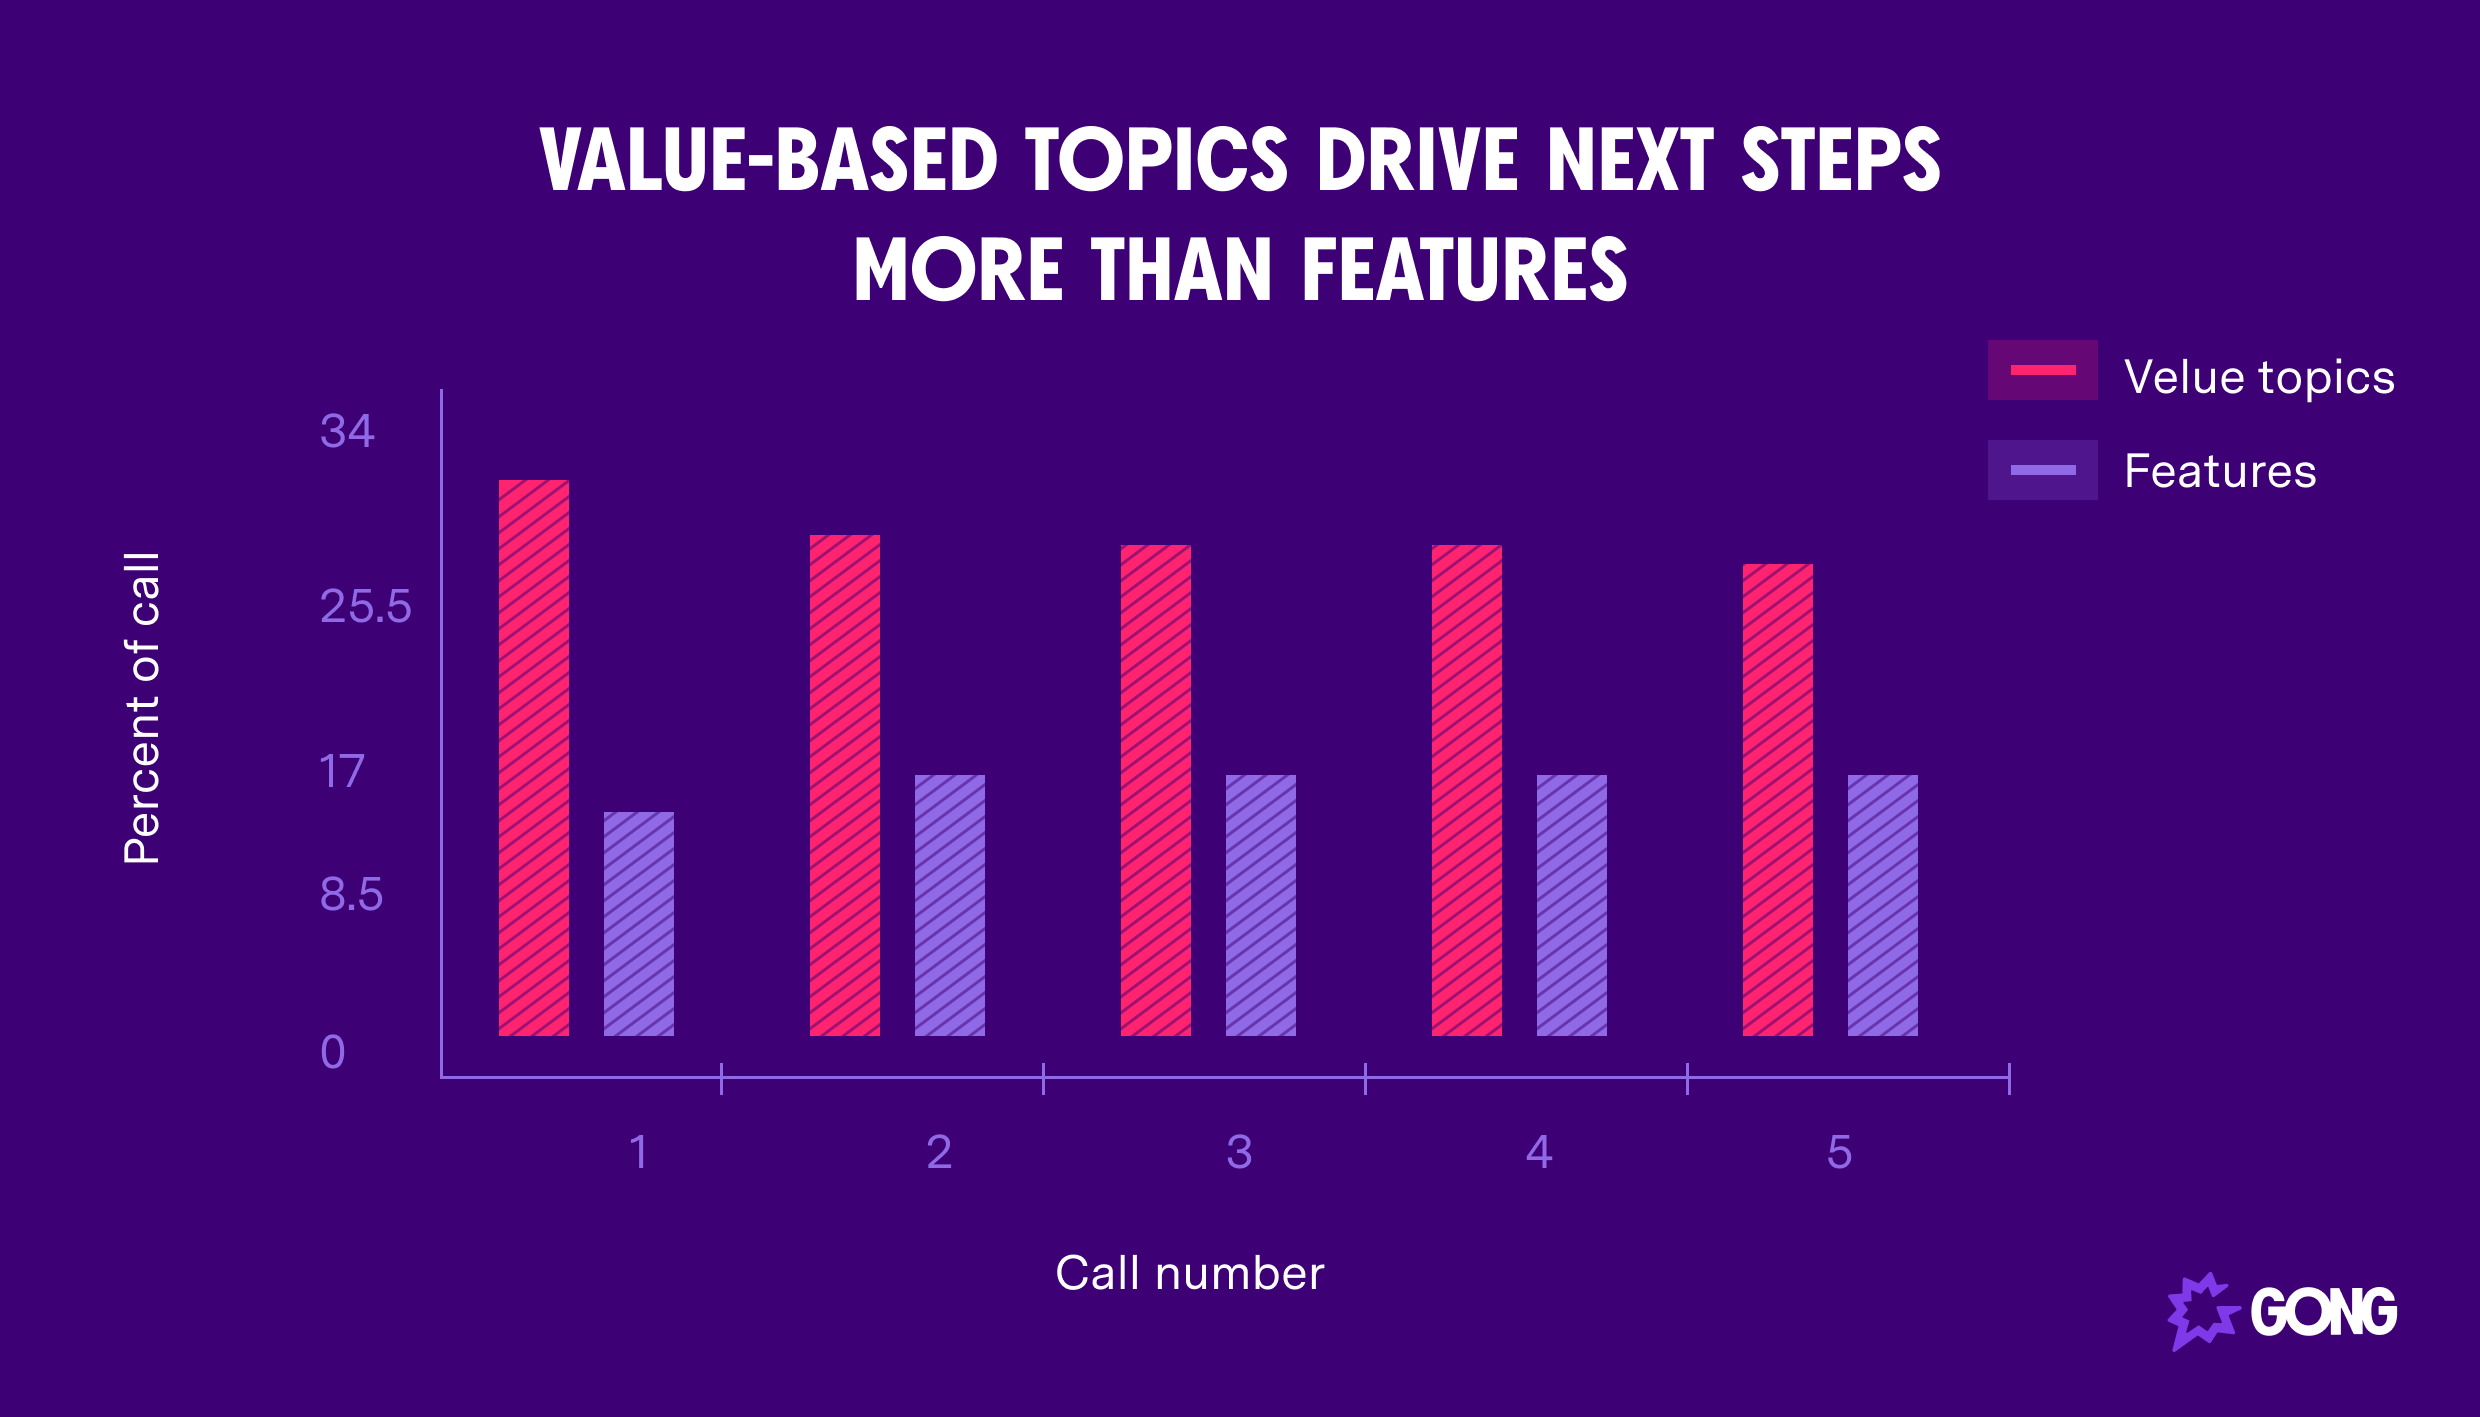 Value-based topics drive next steps